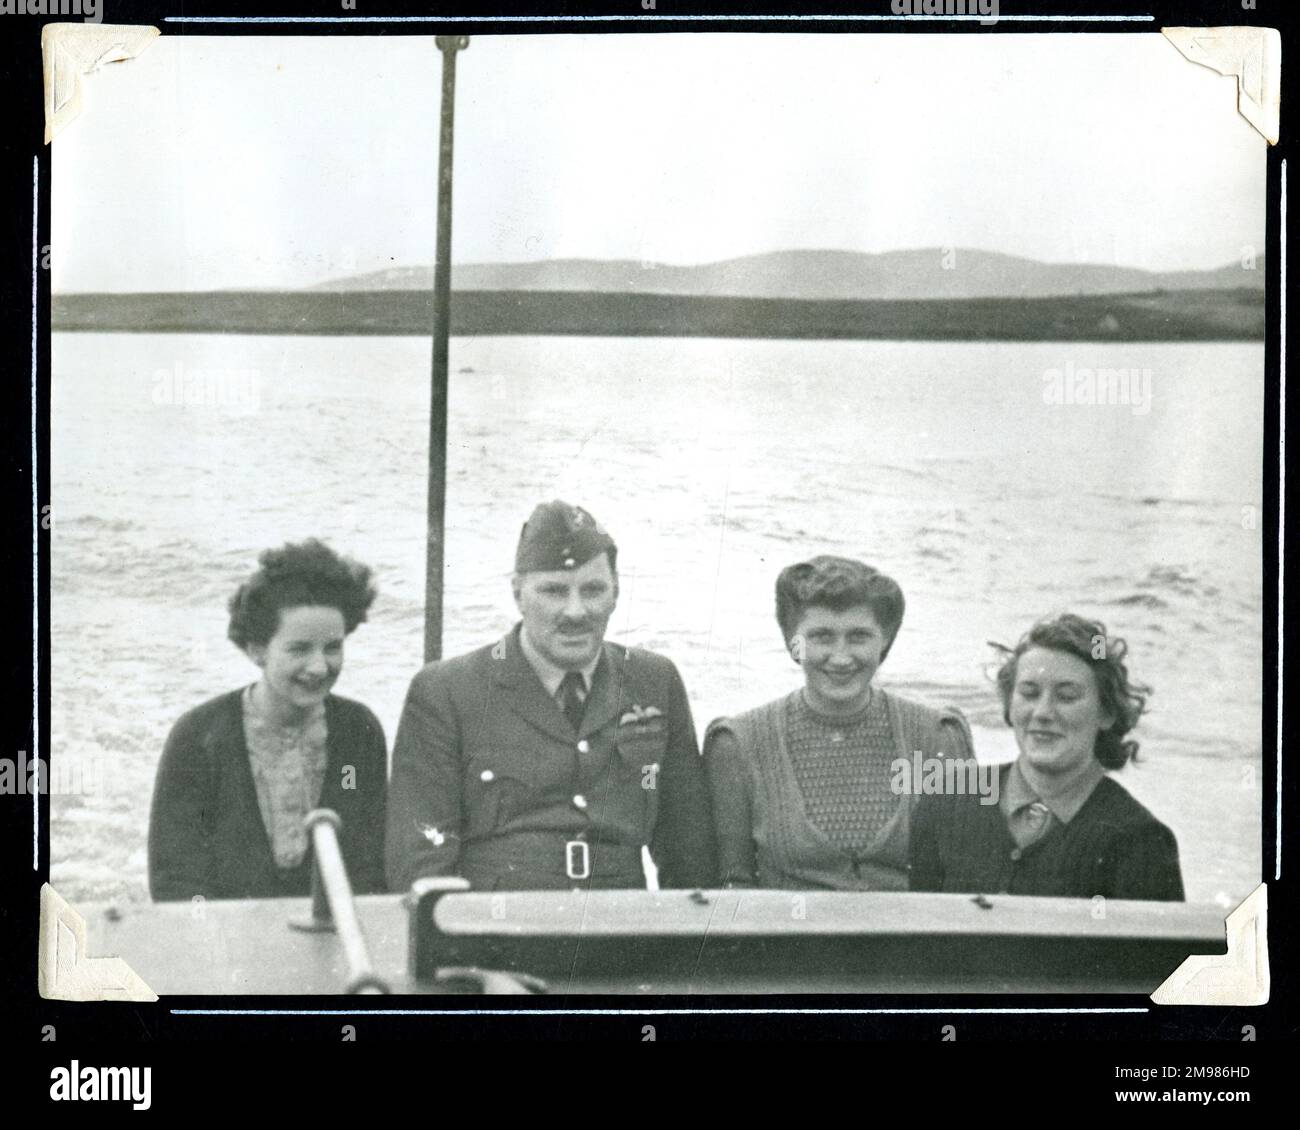 British forces colleagues at Scapa Flow, WW2. Stock Photo